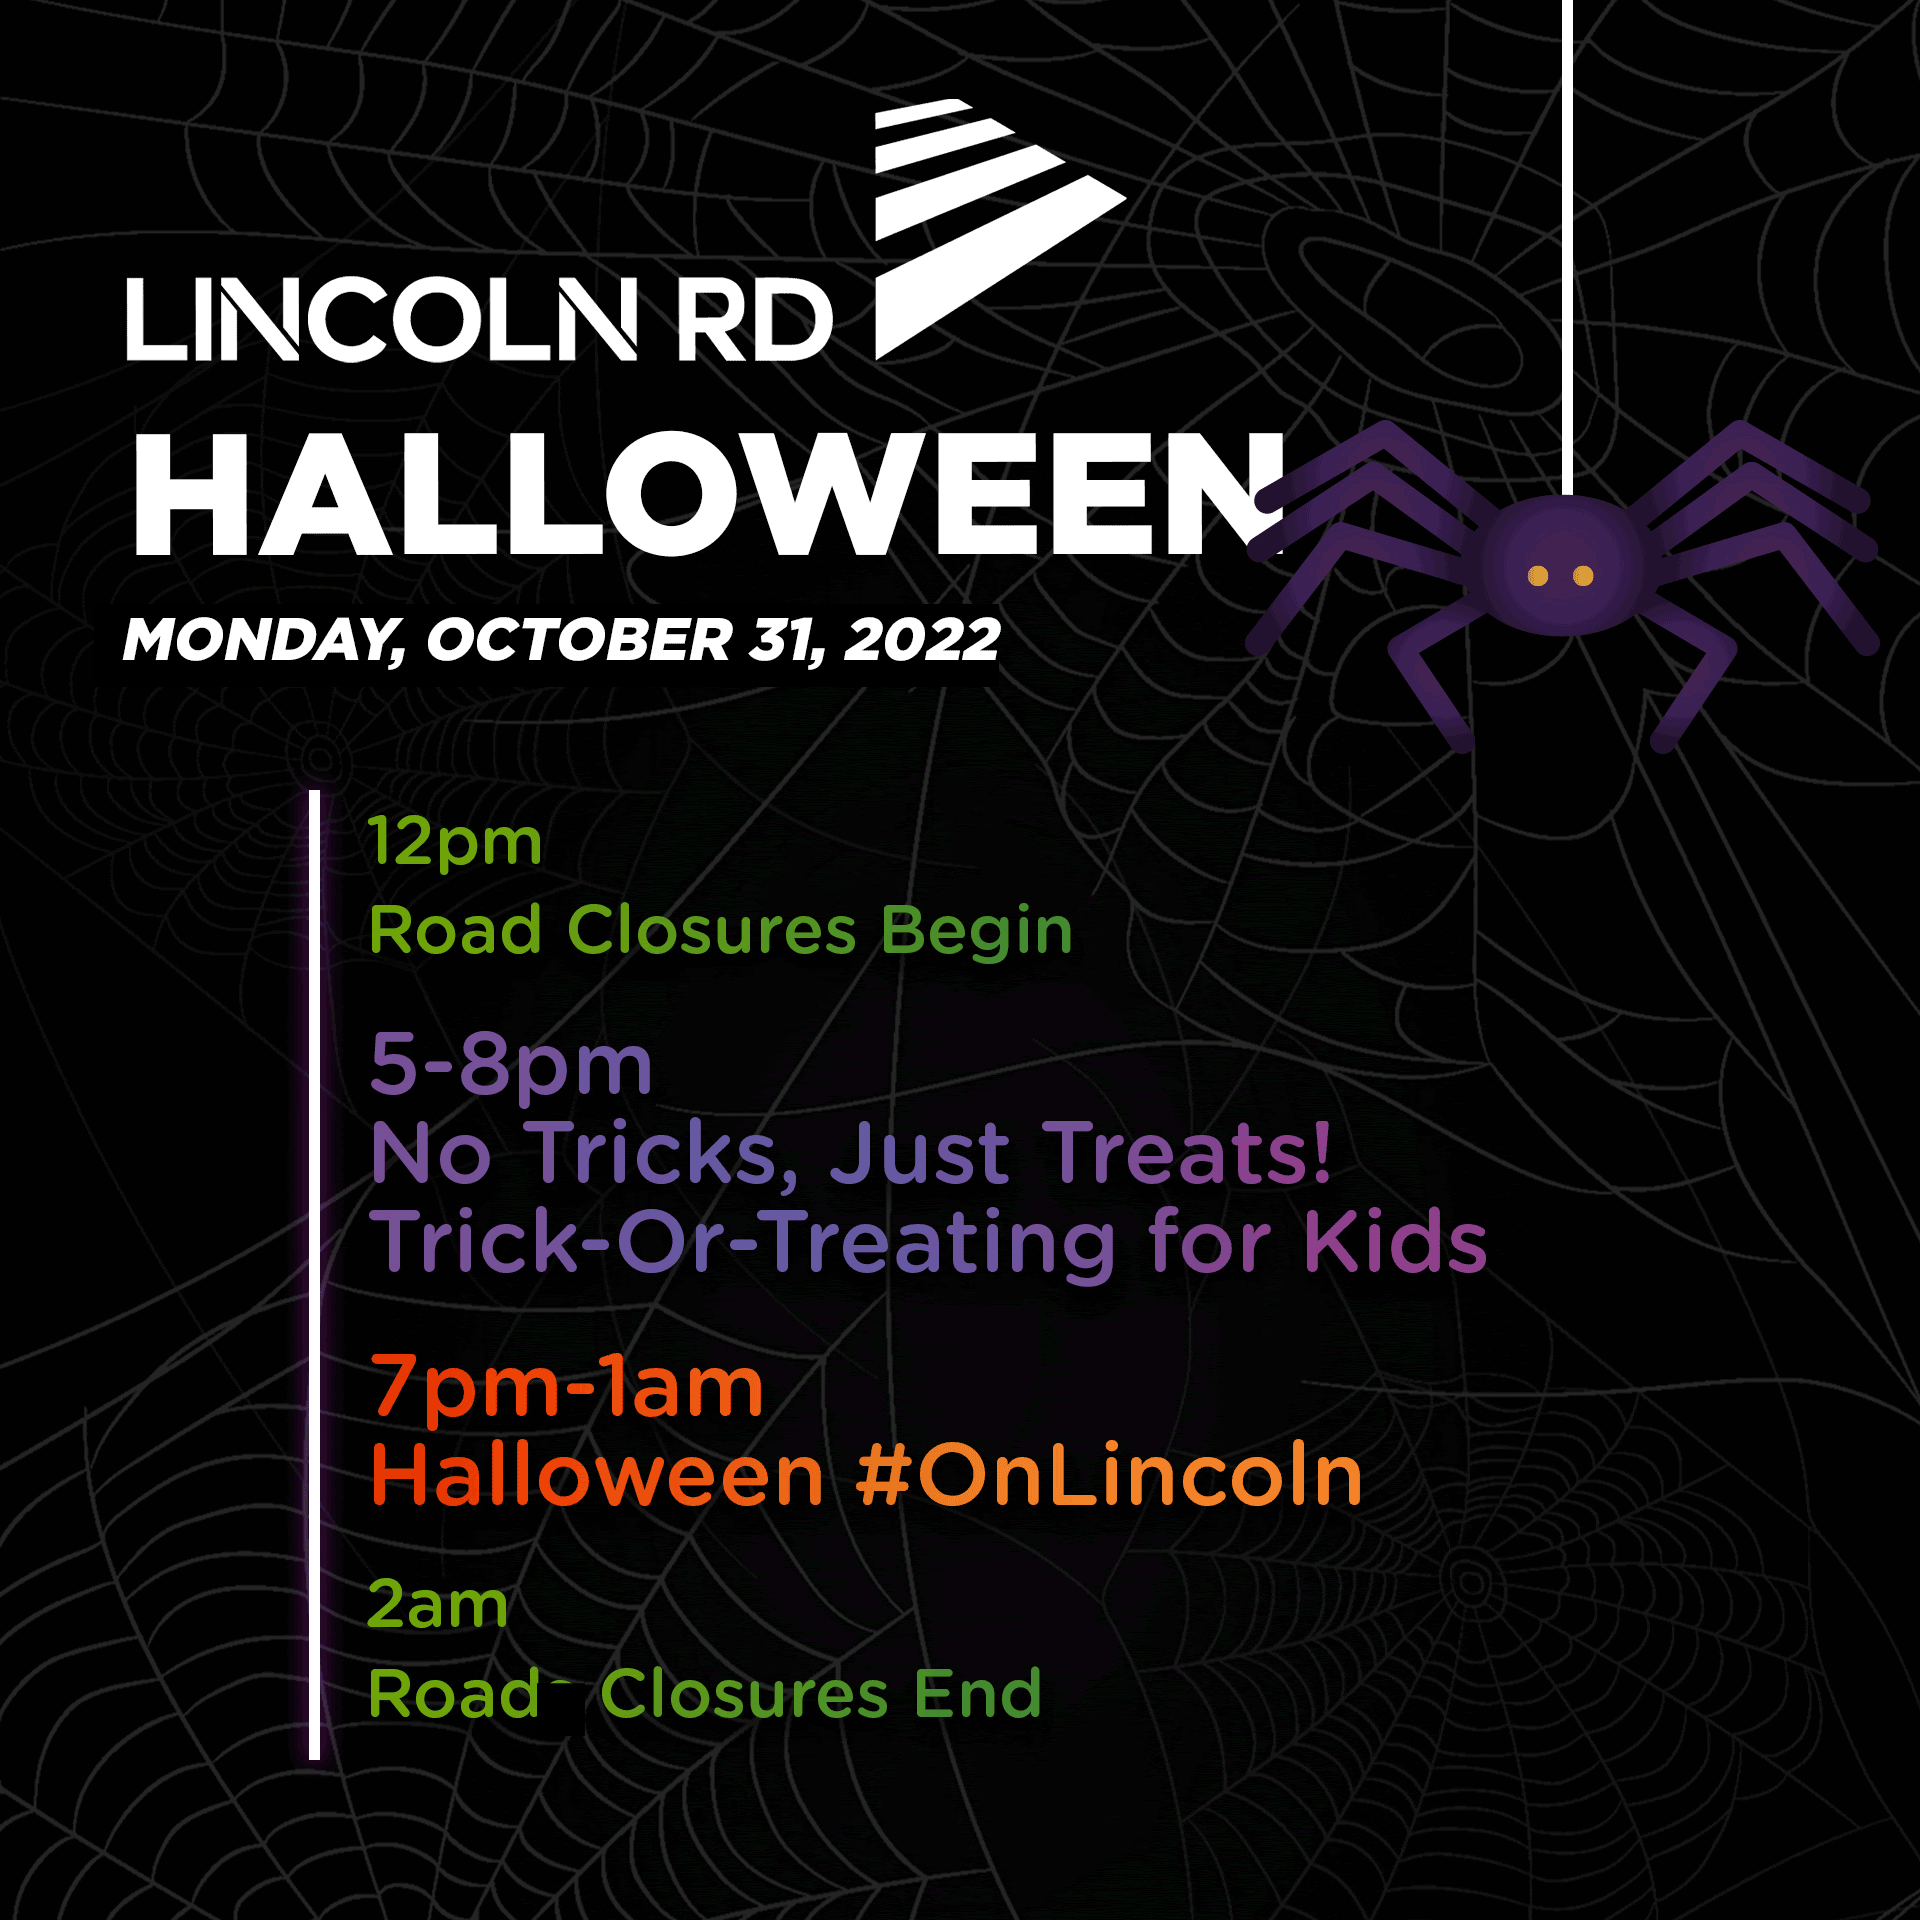 Halloween on Lincoln Road